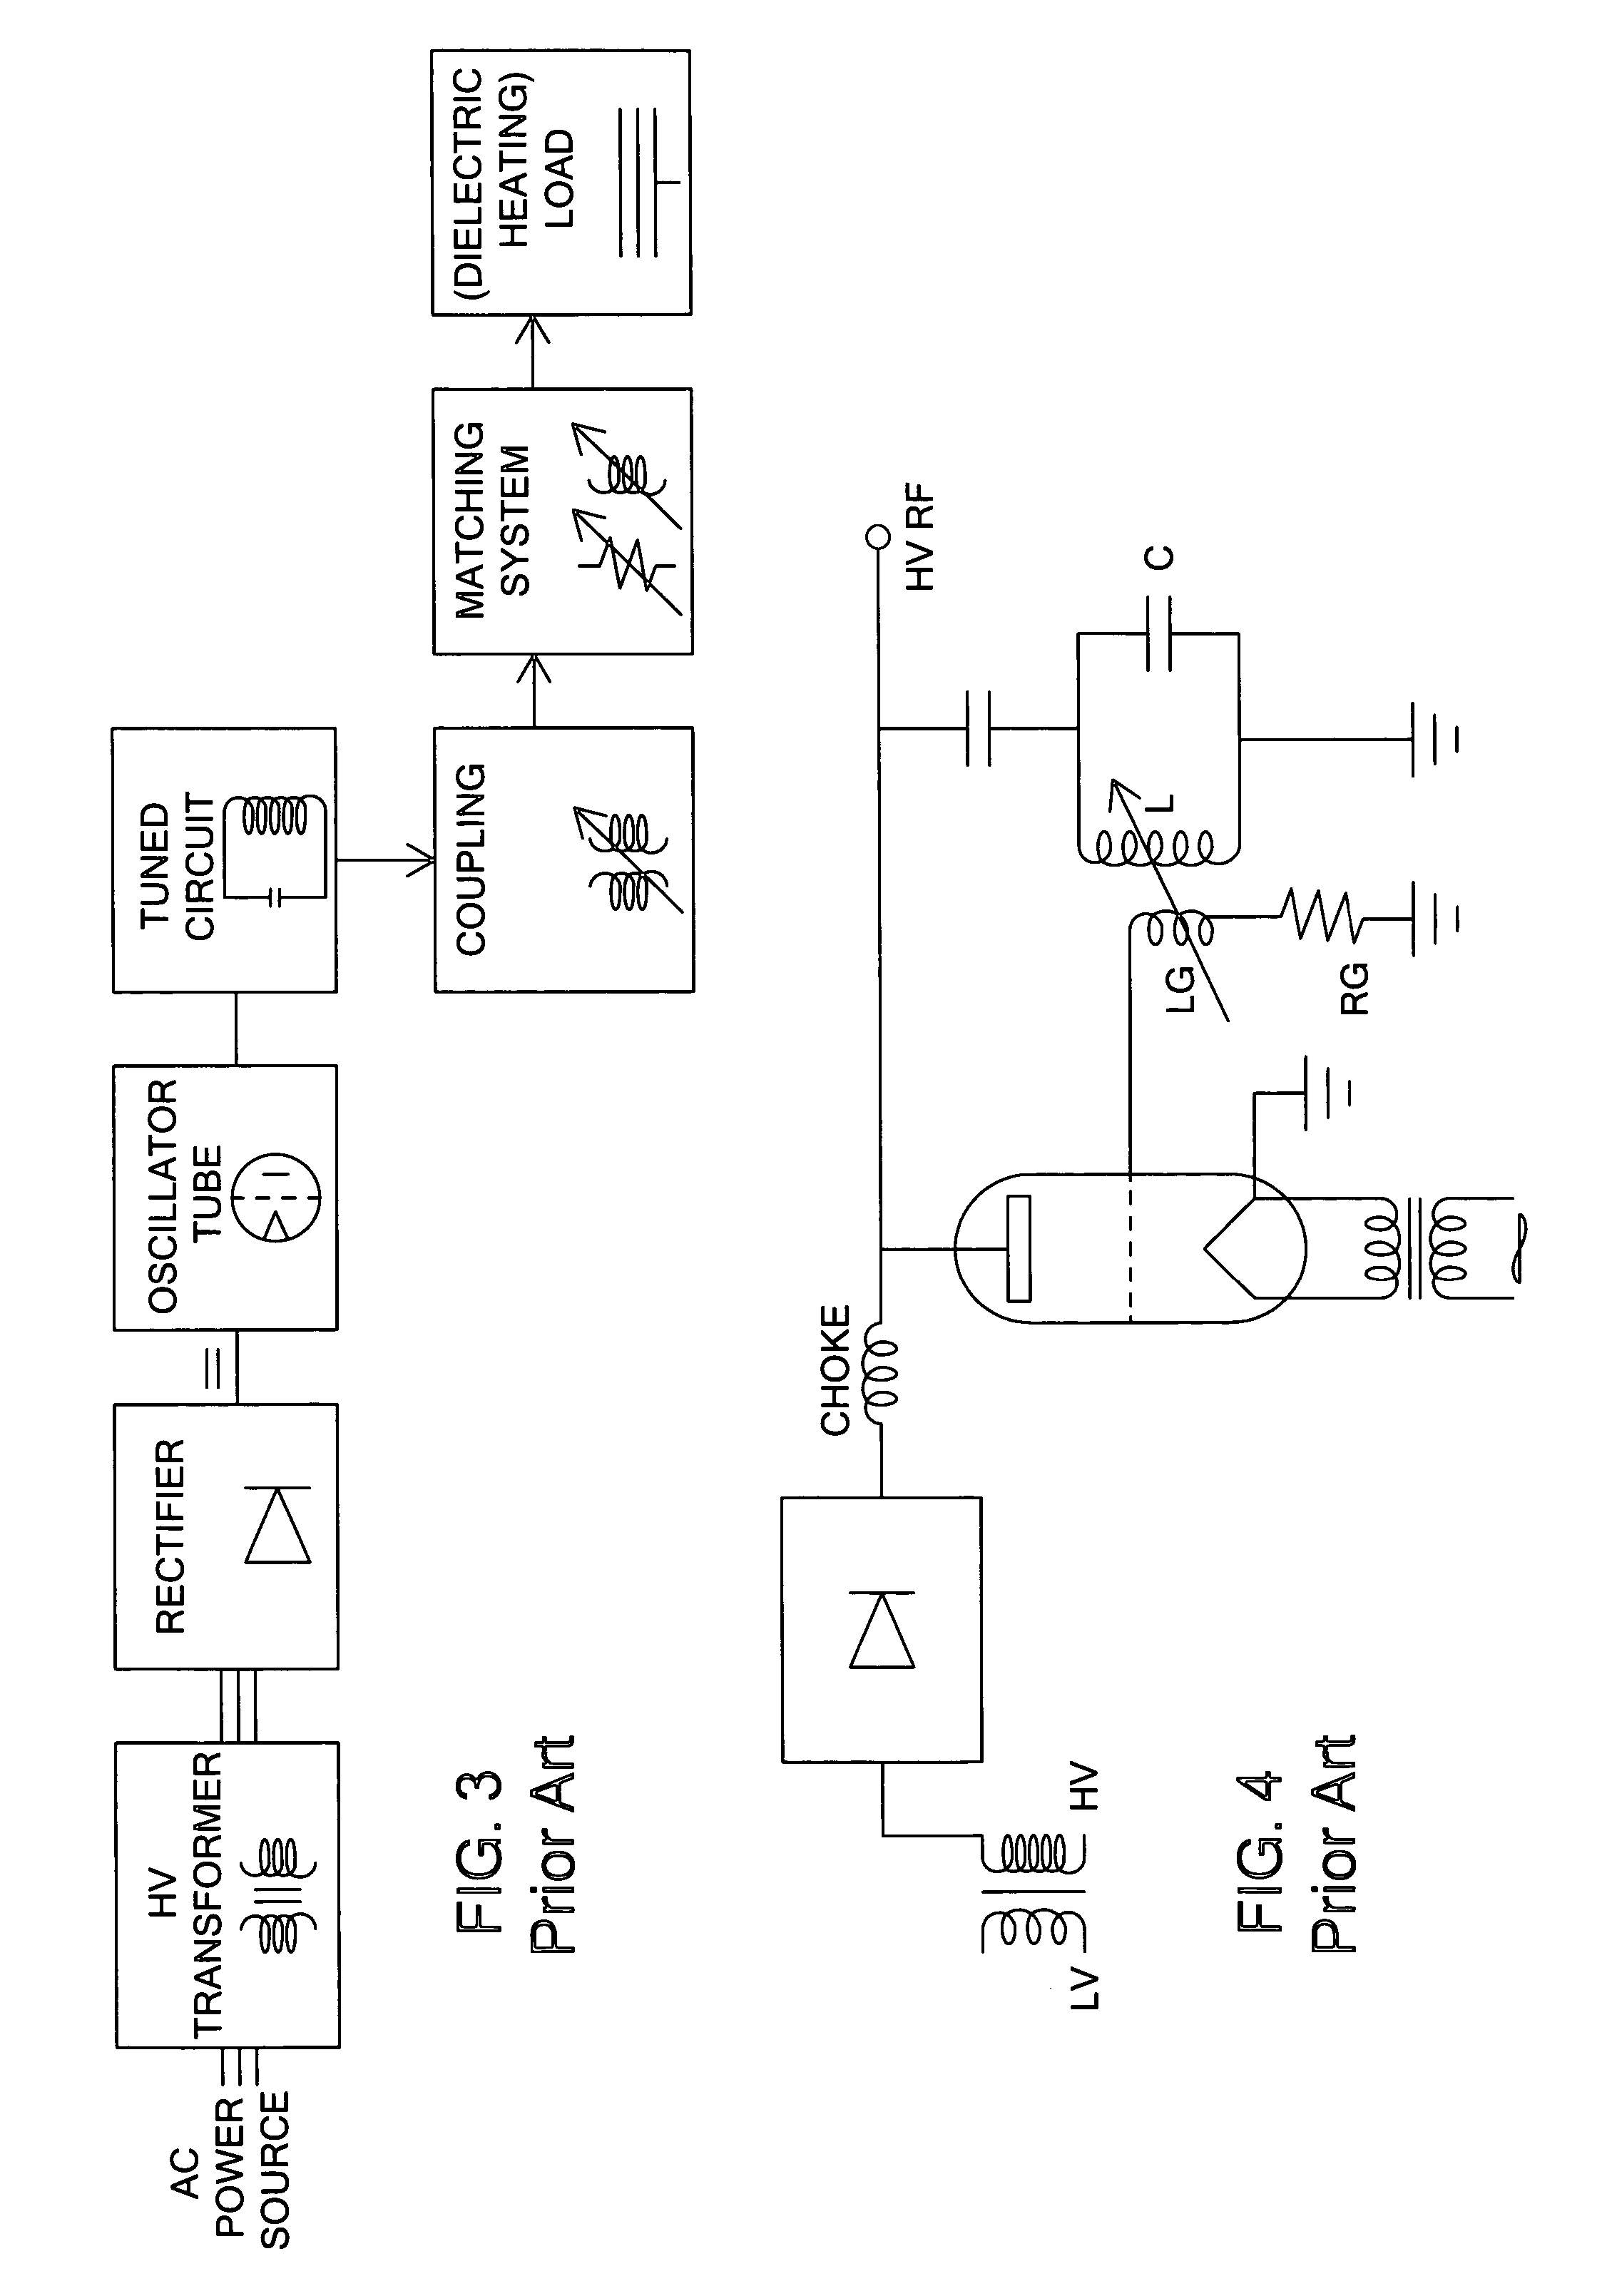 In situ processing of hydrocarbon-bearing formations with automatic impedance matching radio frequency dielectric heating